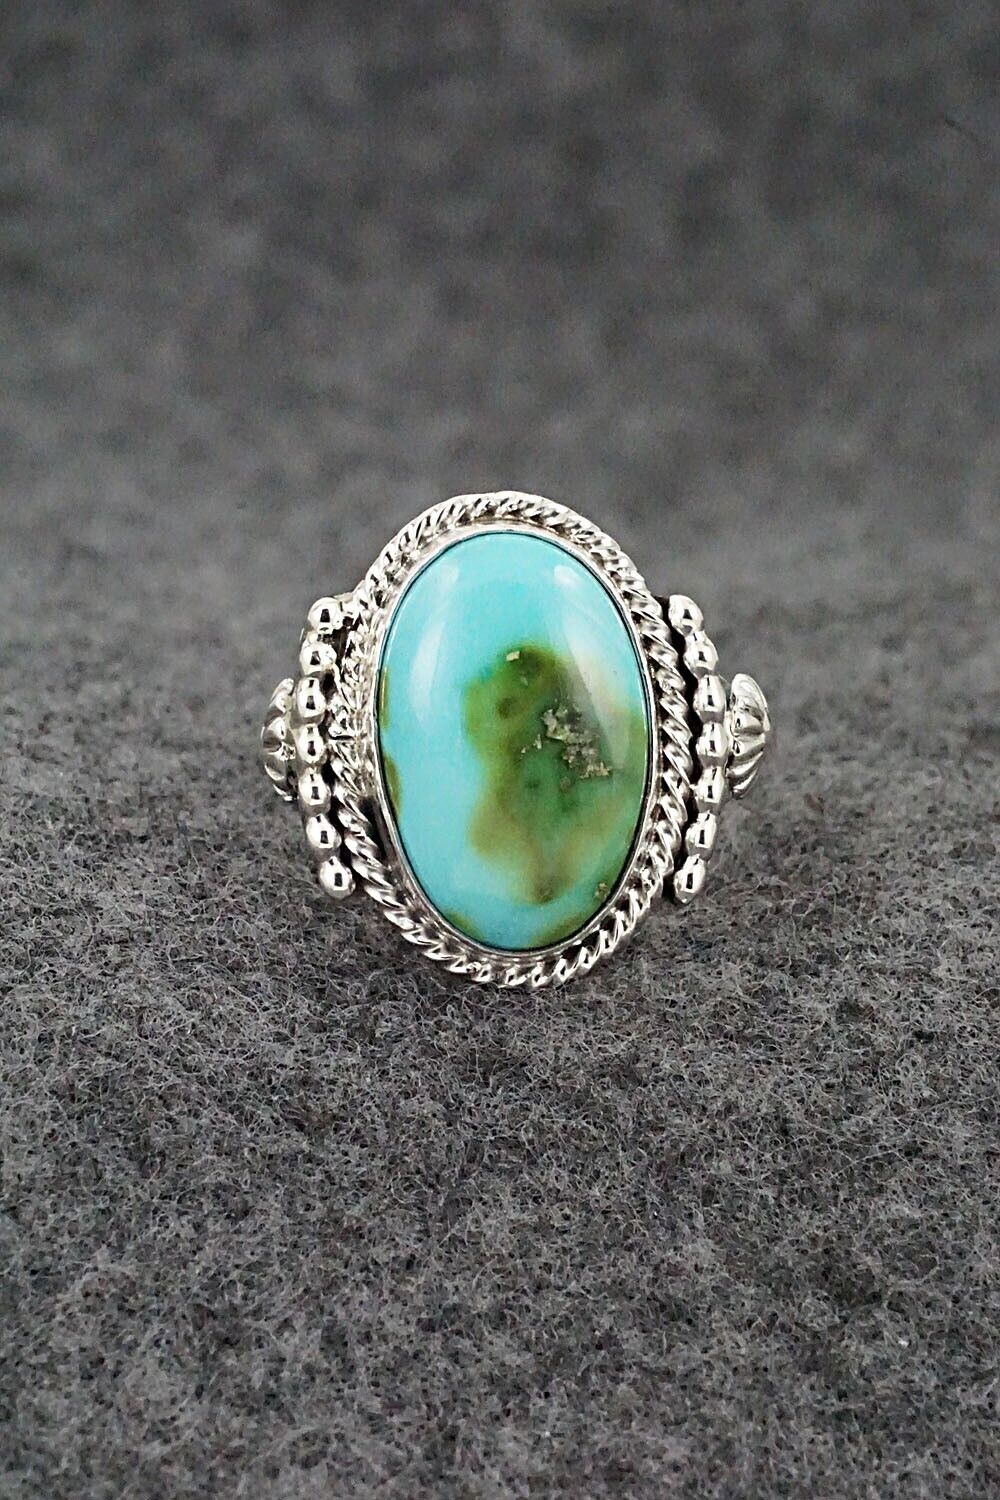 Turquoise & Sterling Silver Ring - Andrew Vandever - Size 8.5